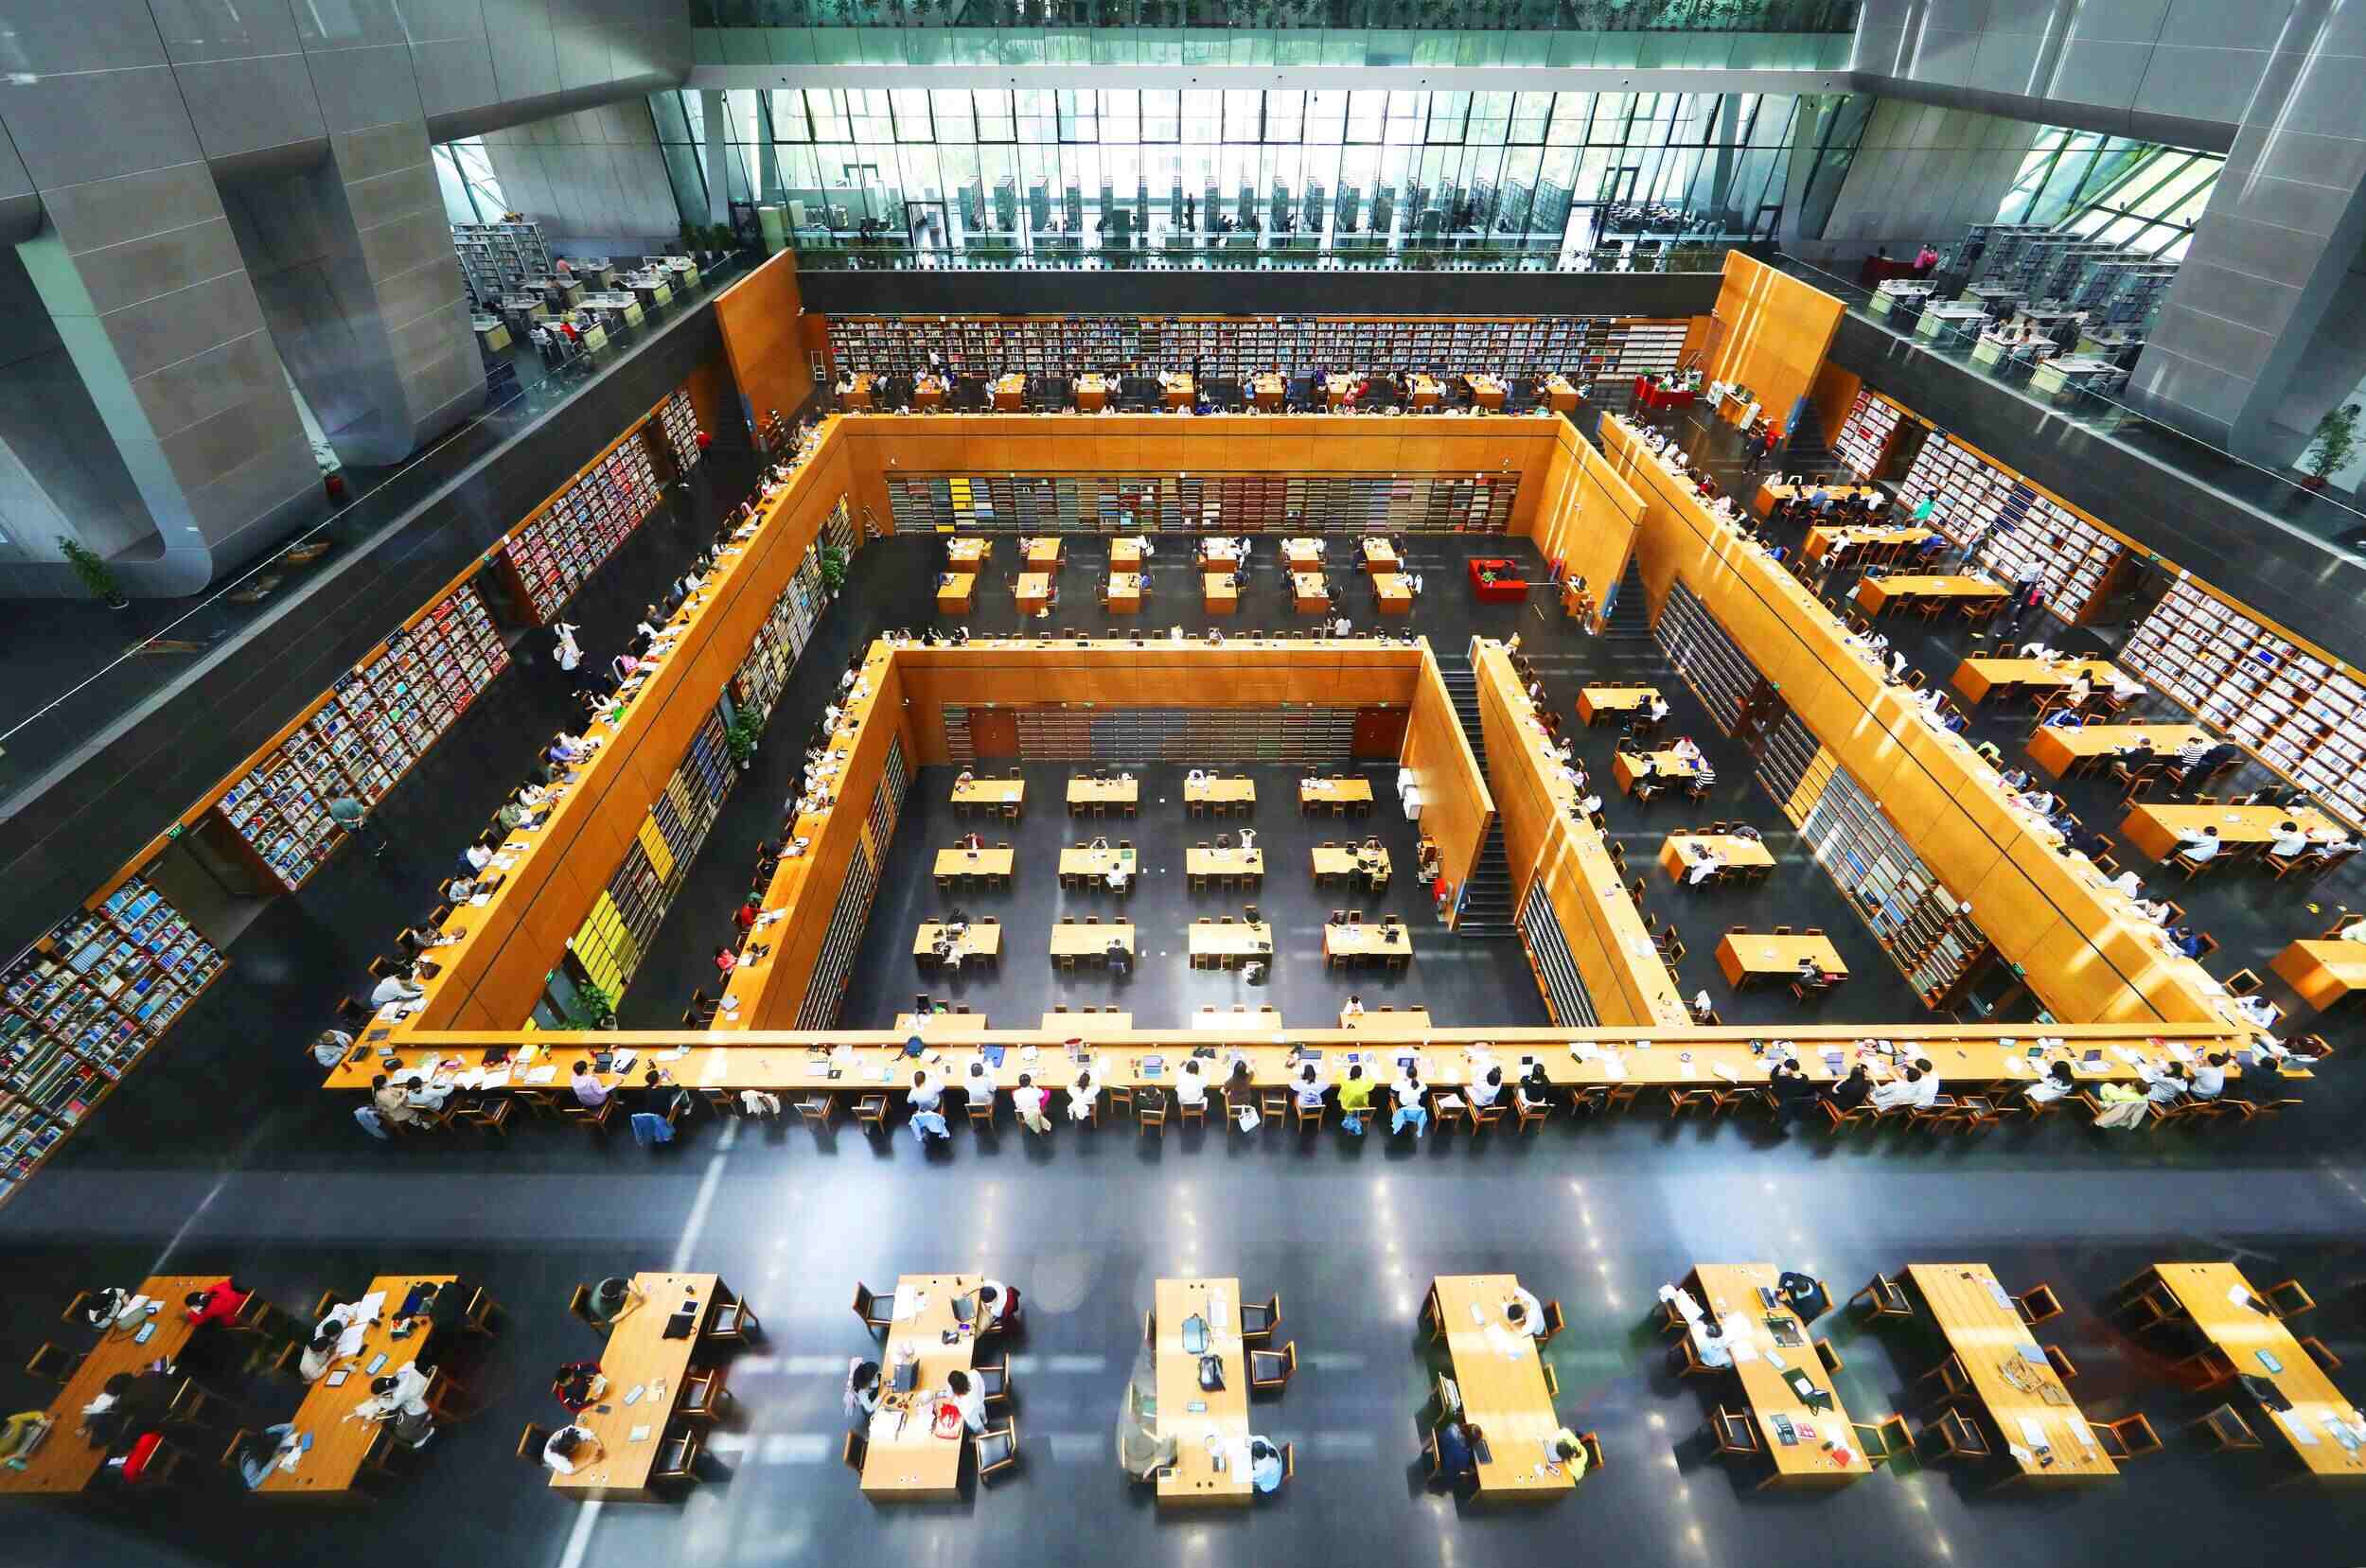 13-extraordinary-facts-about-the-national-library-of-china